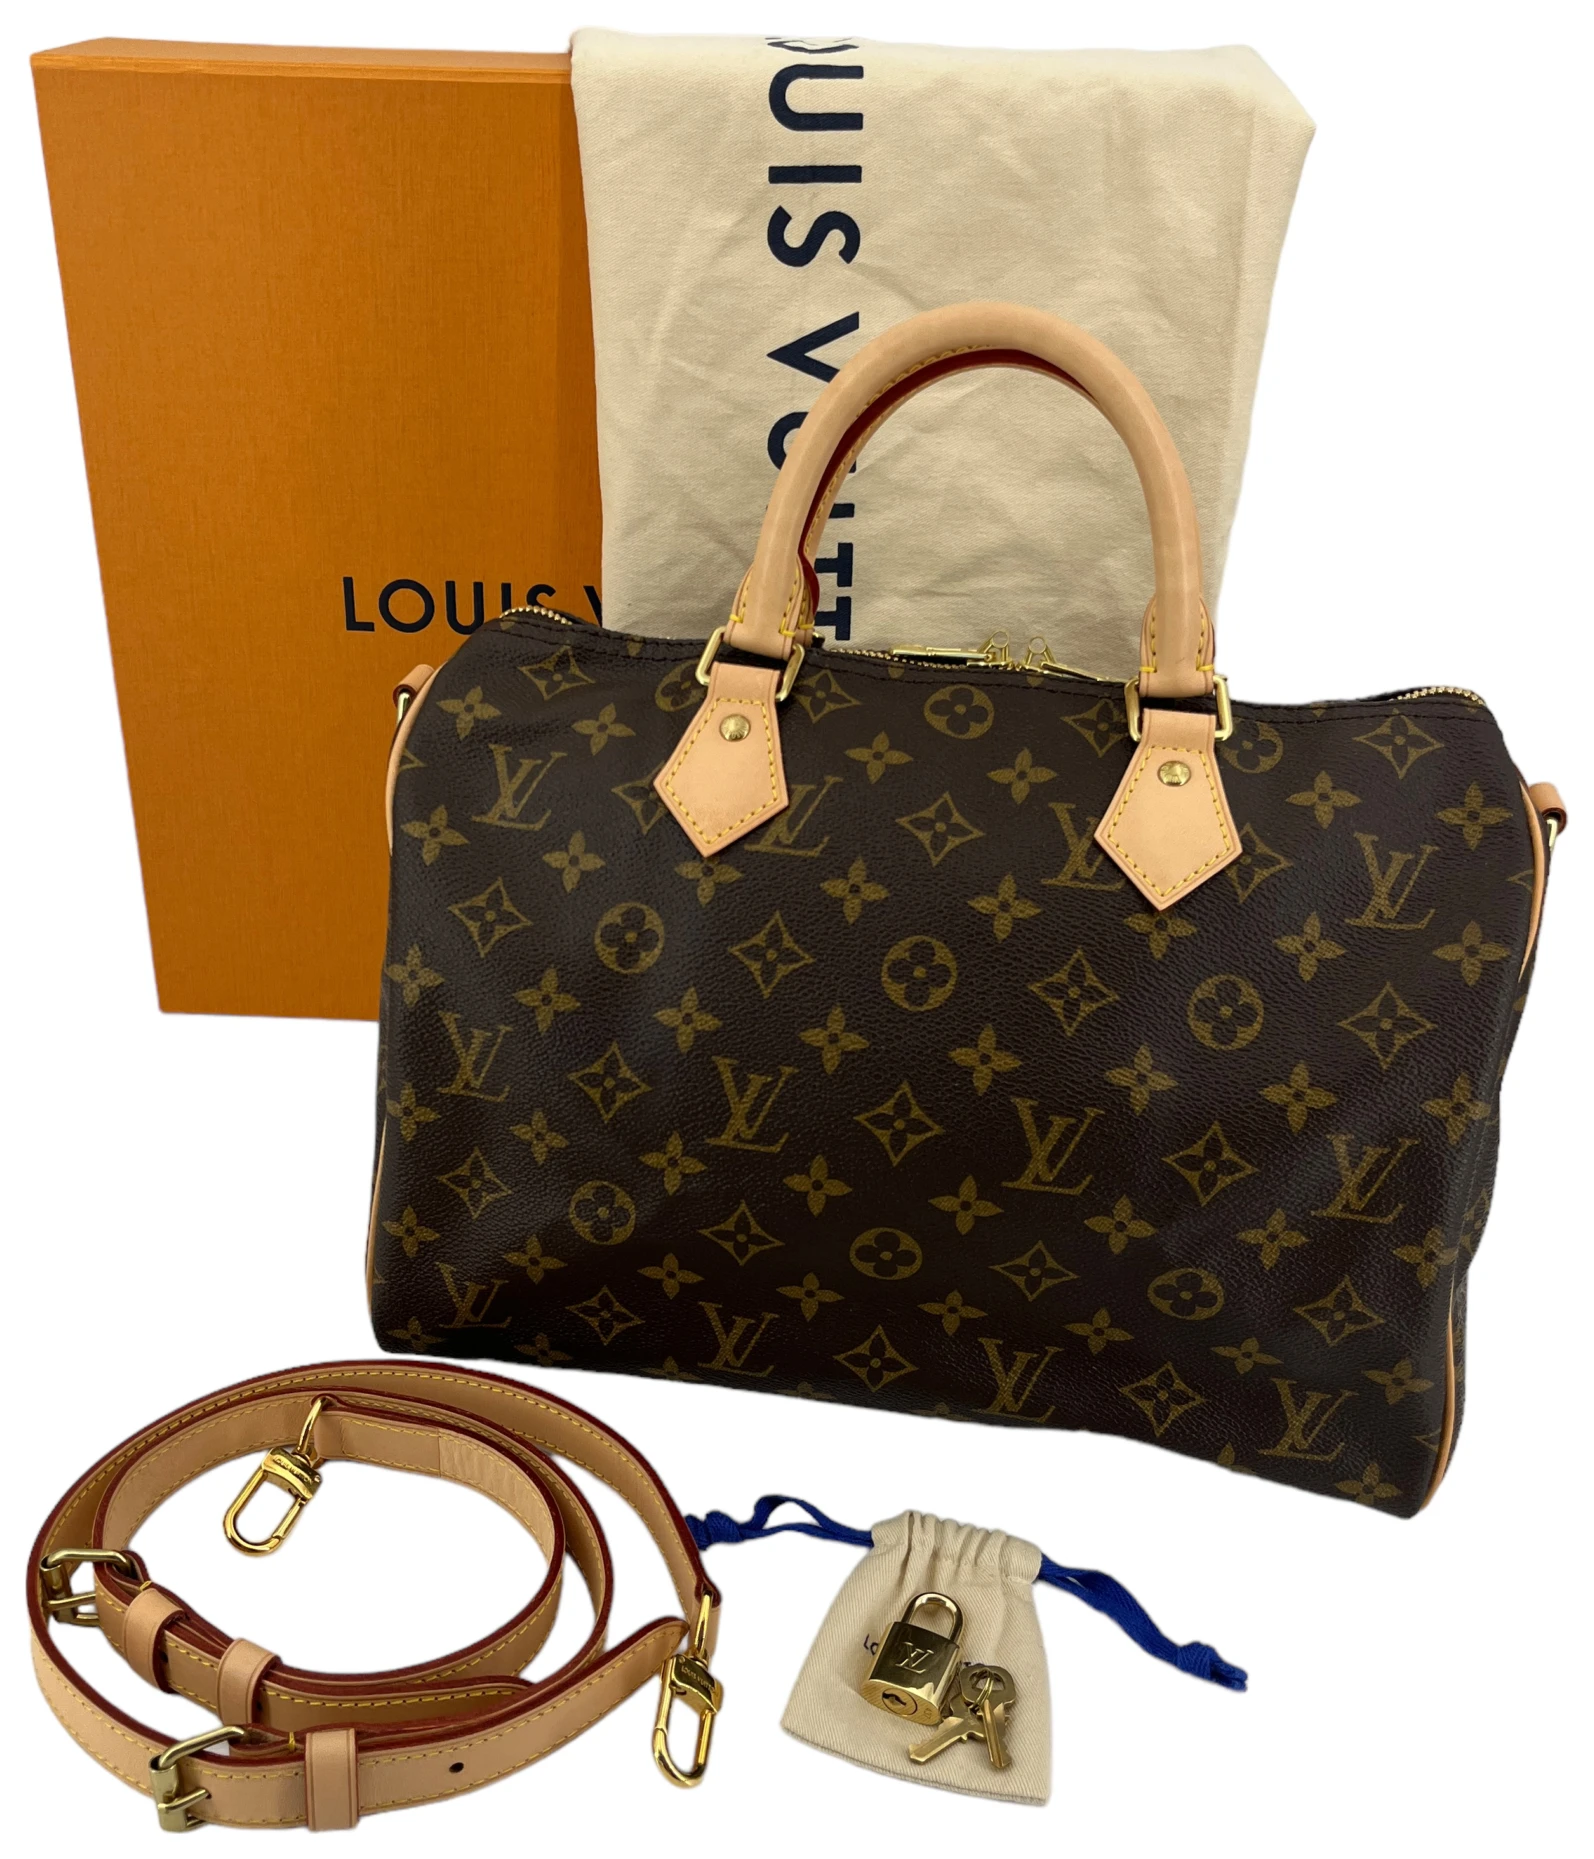 In LVoe with Louis Vuitton: Louis Vuitton Speedy MONOGRAM with